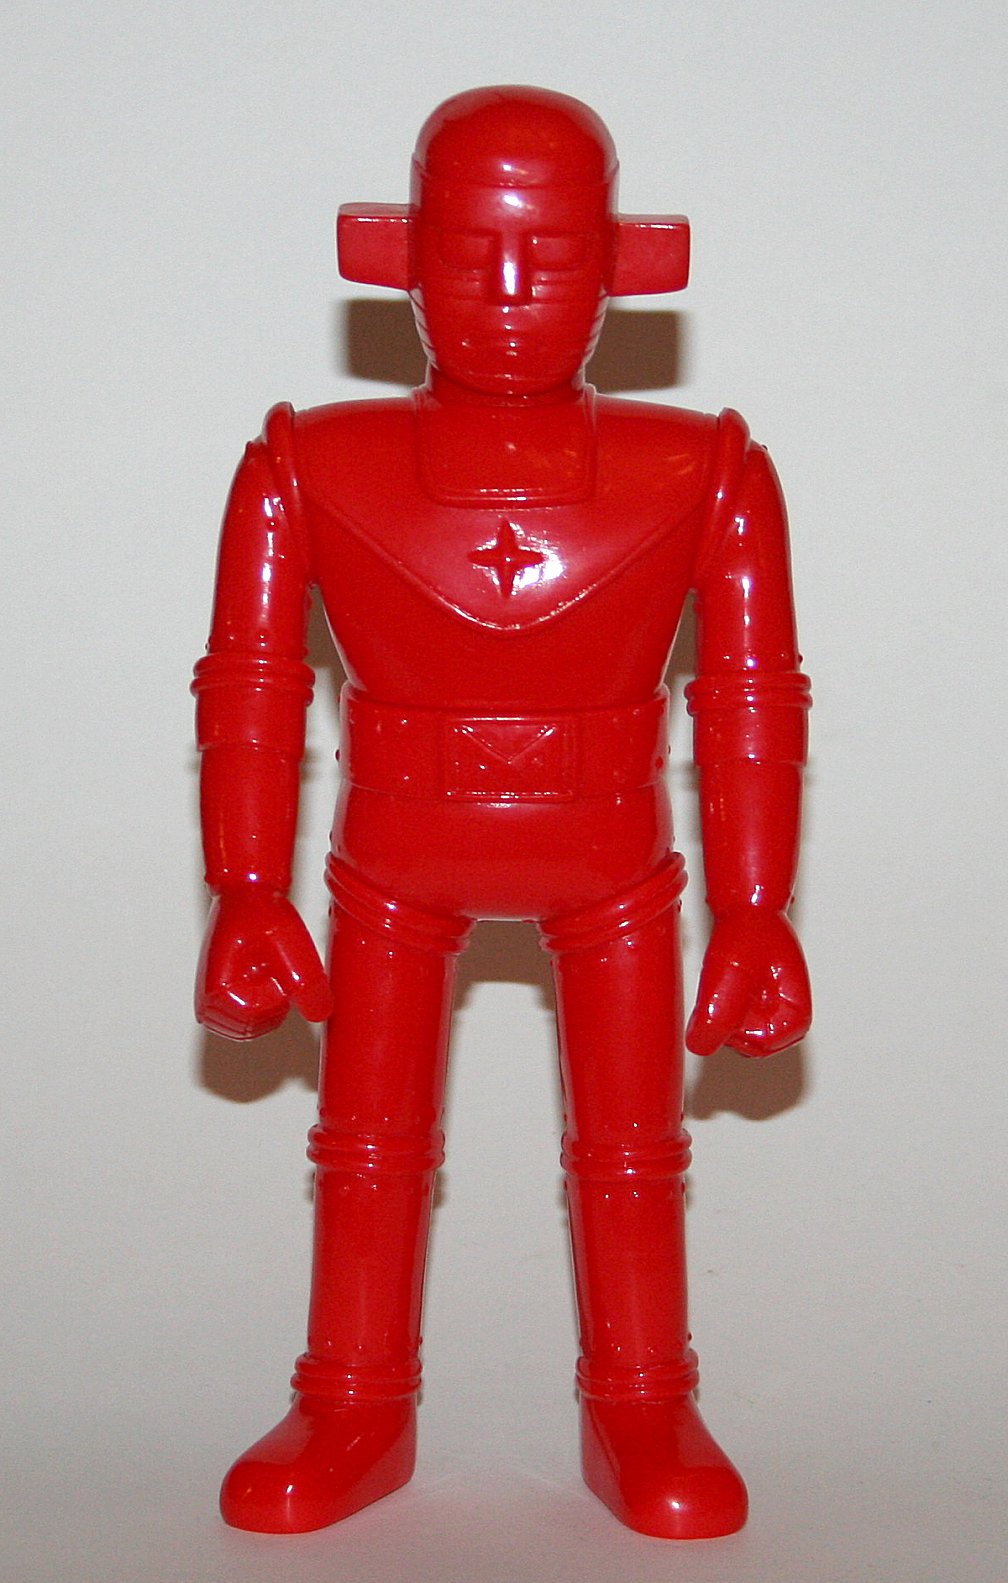 Awesome Toy Unpainted Red Super Robot Fake Baron